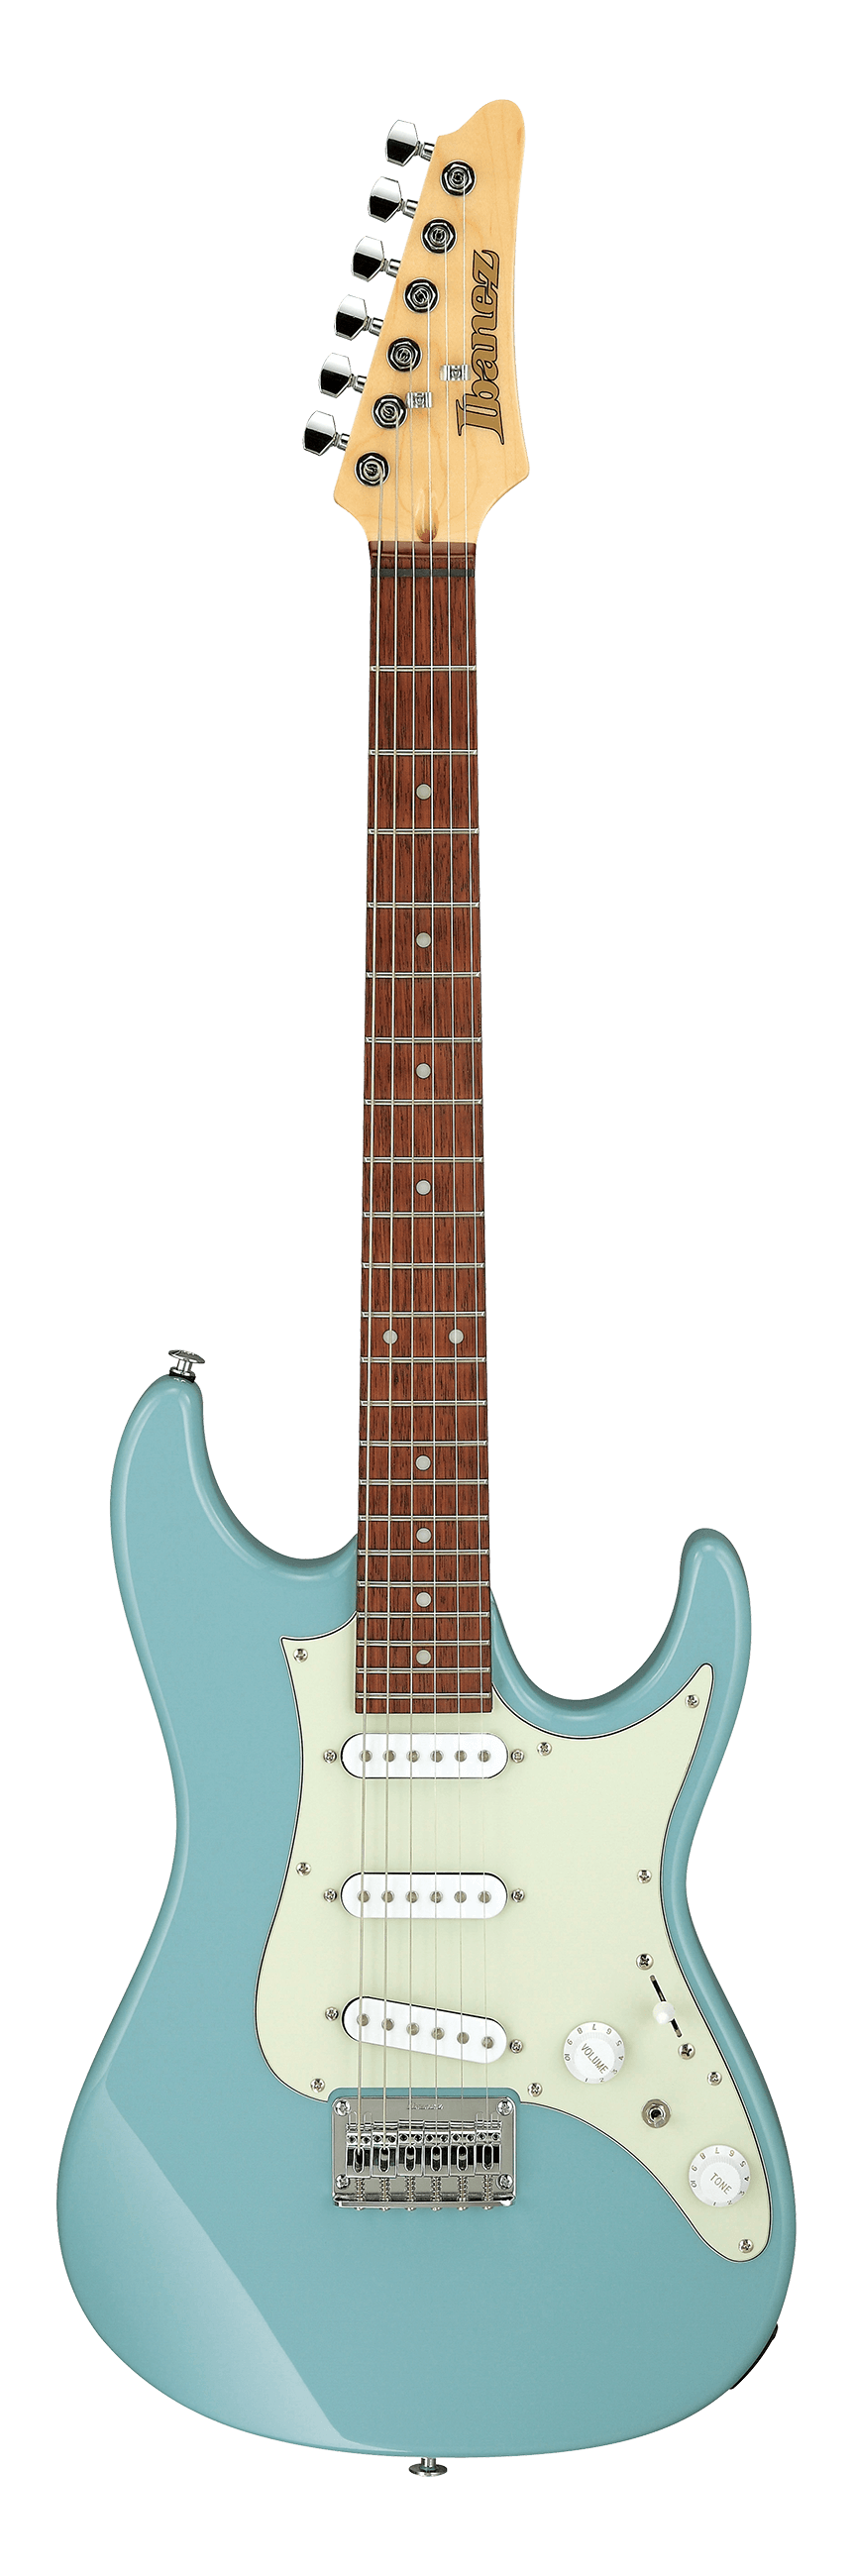 Ibanez AZES31 Electric Guitar - Purist Blue